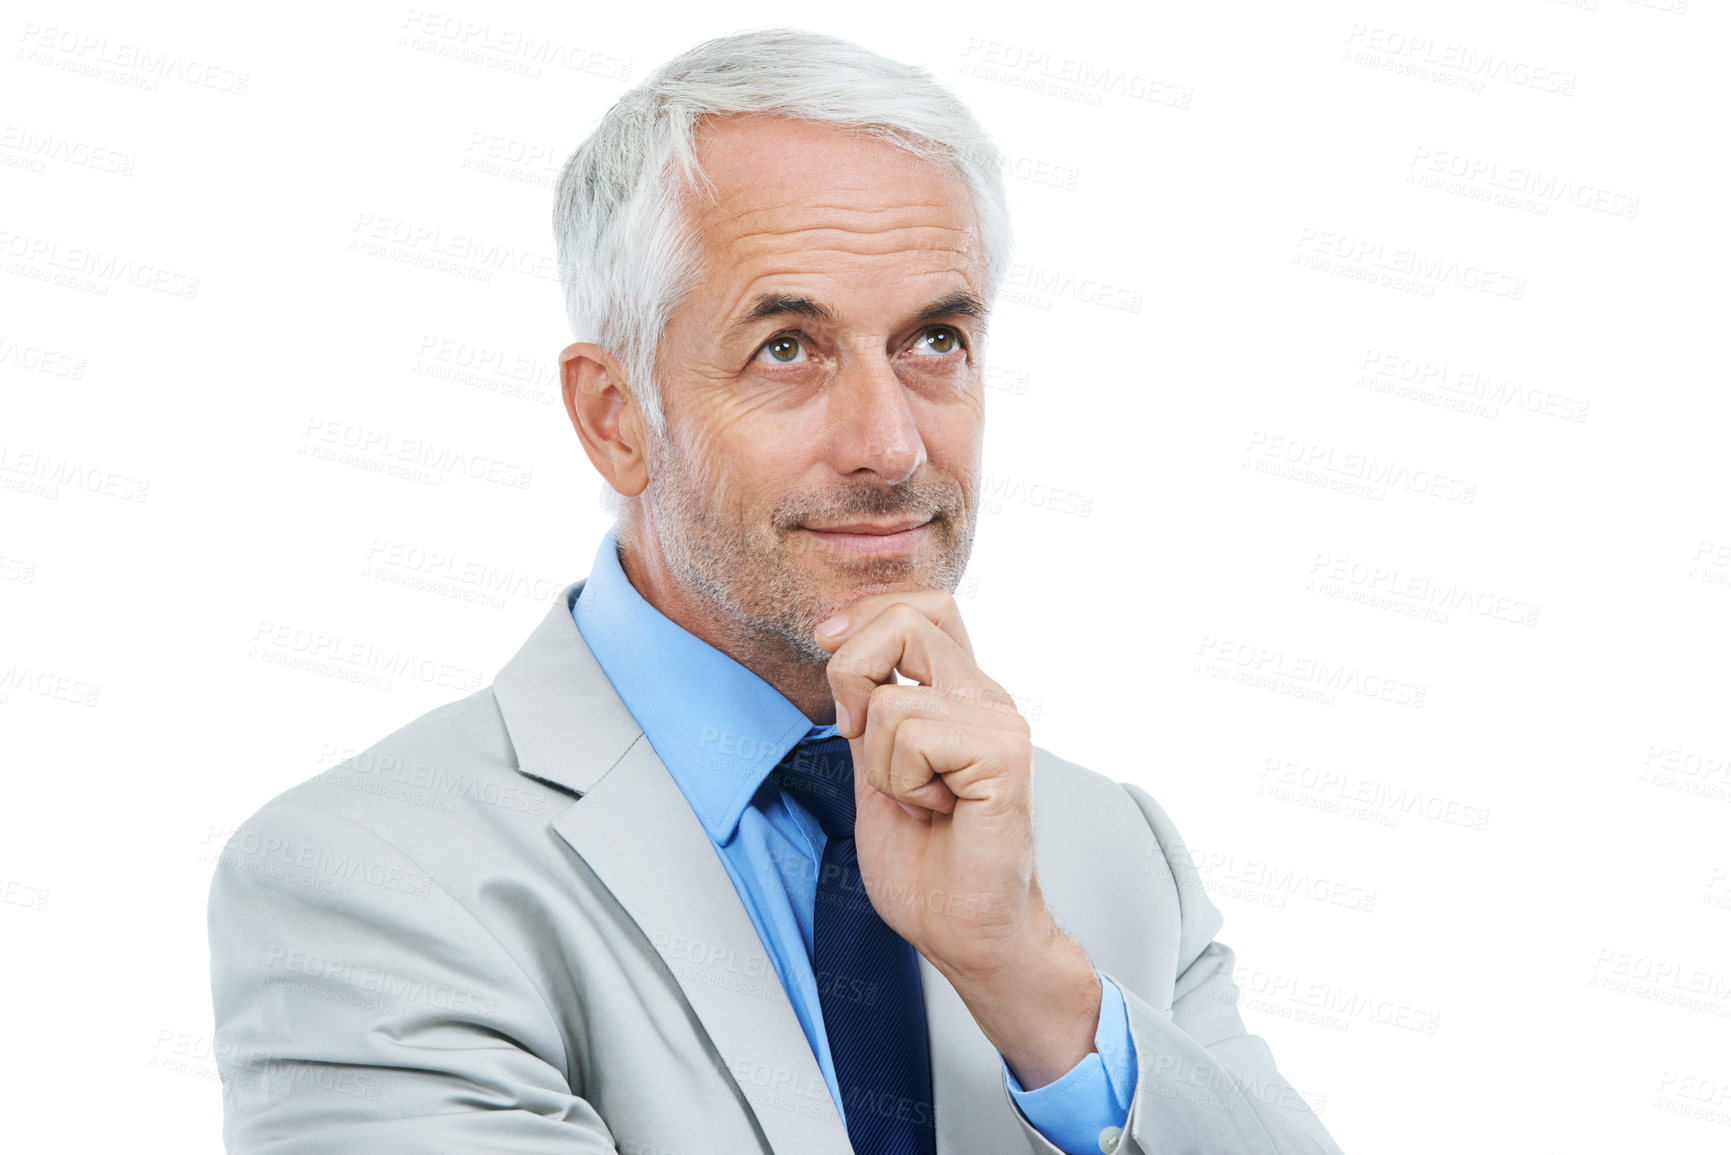 Buy stock photo Idea, senior man and suit in studio with white background, thinking for future plans. Corporate, professional and formal with experience, wisdom and business career with advice for entrepreneurs 